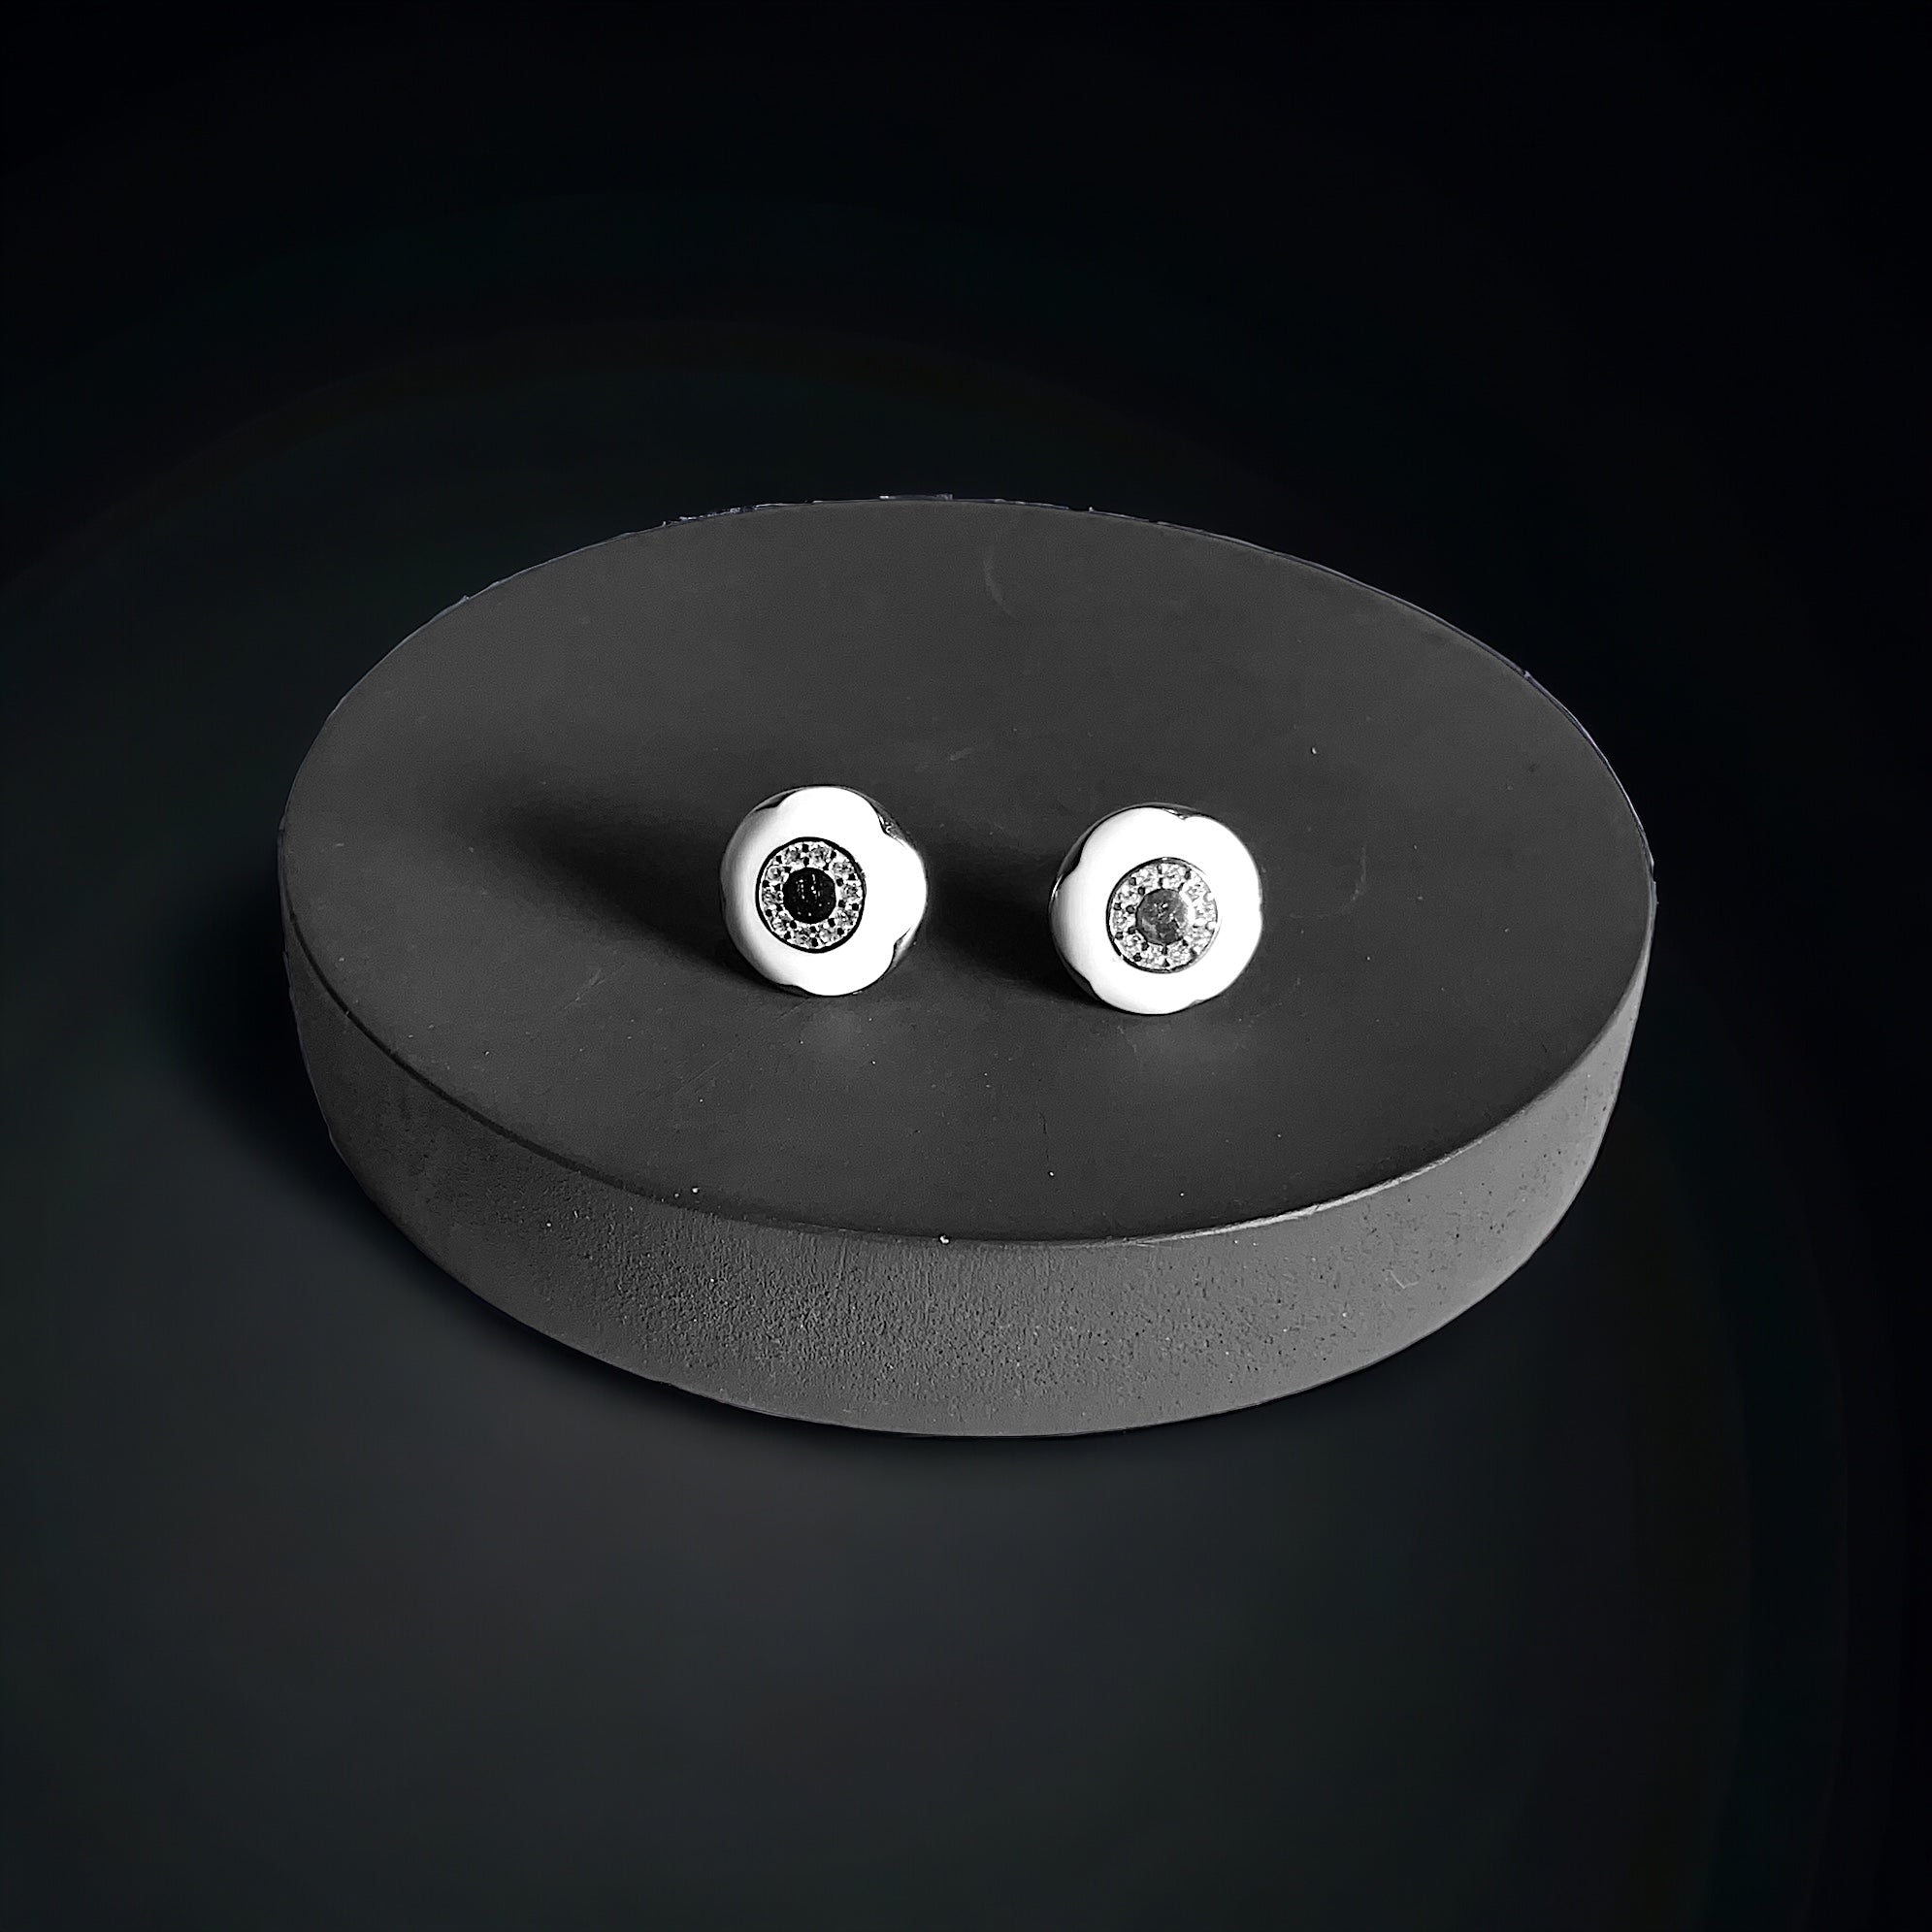 a pair of white diamond stud earrings on a black surface